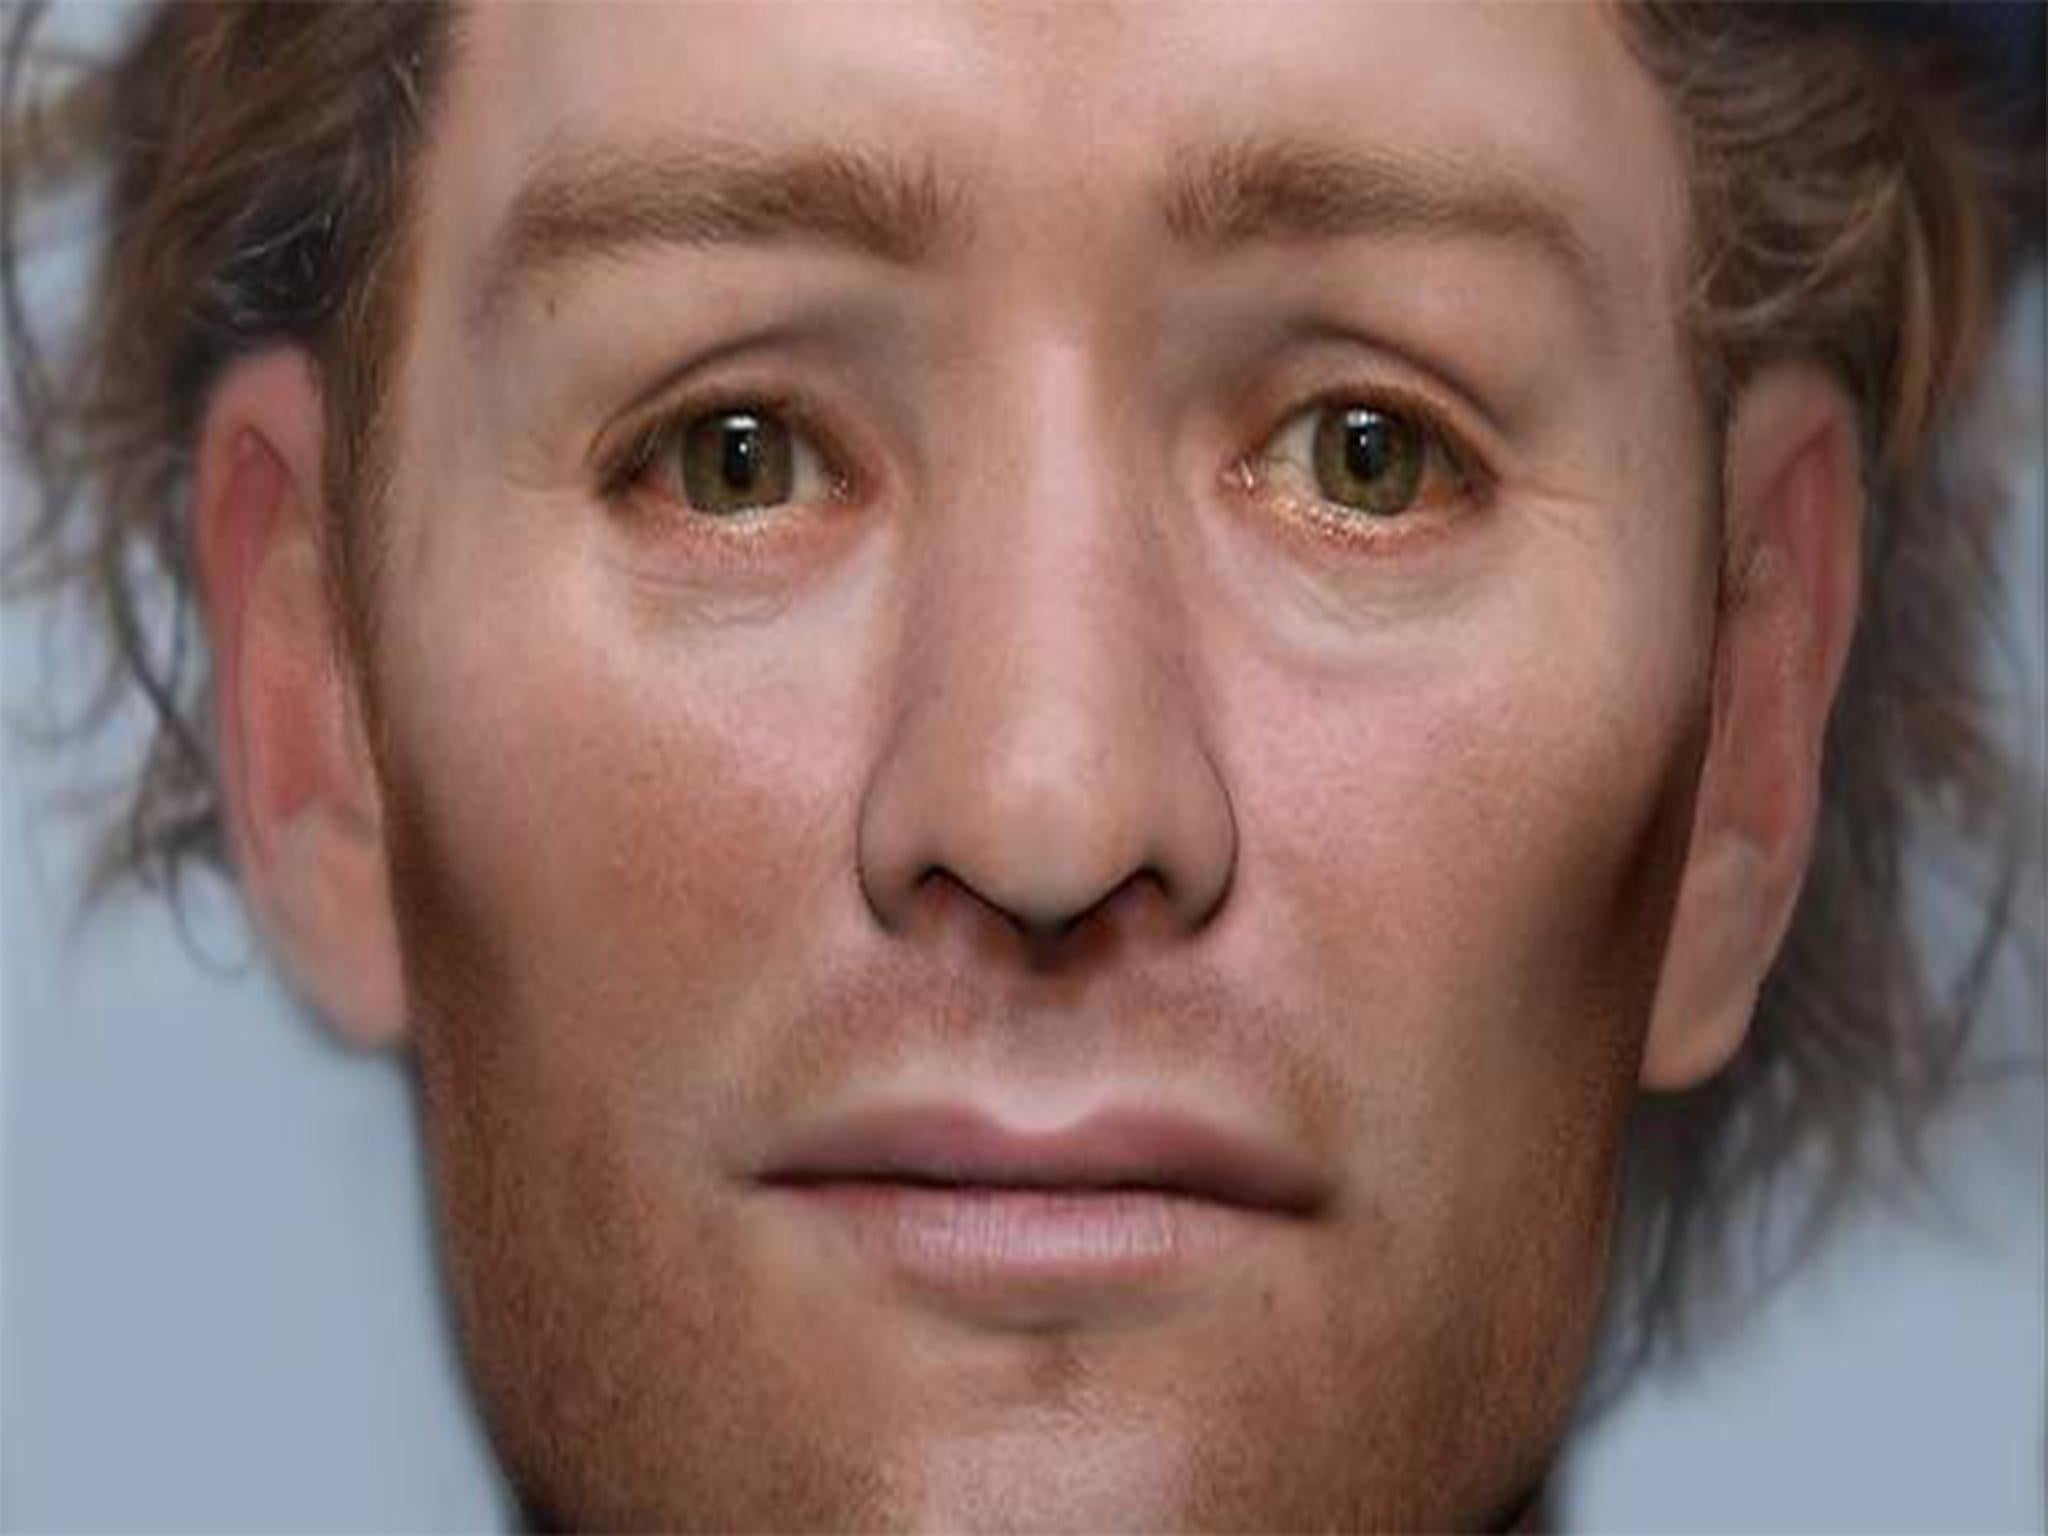 Face Lab has already reconstructed historical figures including Robert the Bruce, Richard III and St Nicholas